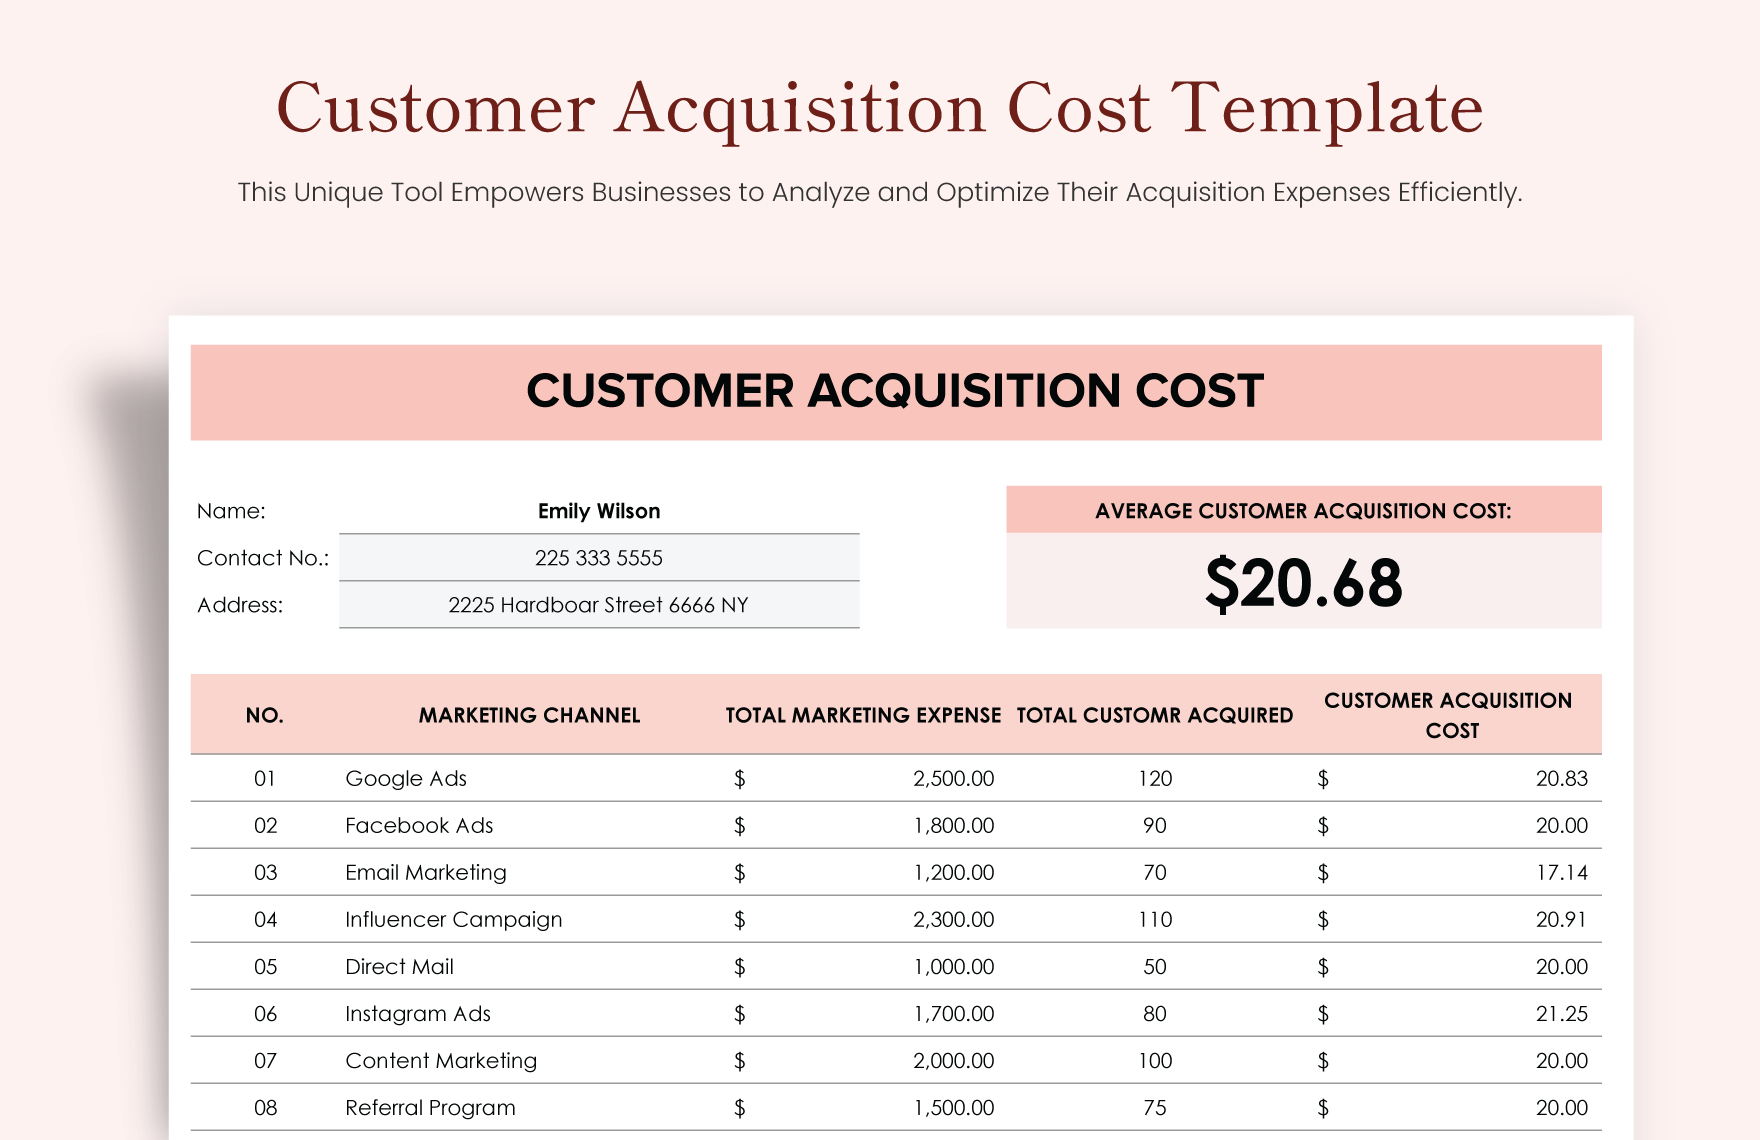 Customer Acquisition Cost Template